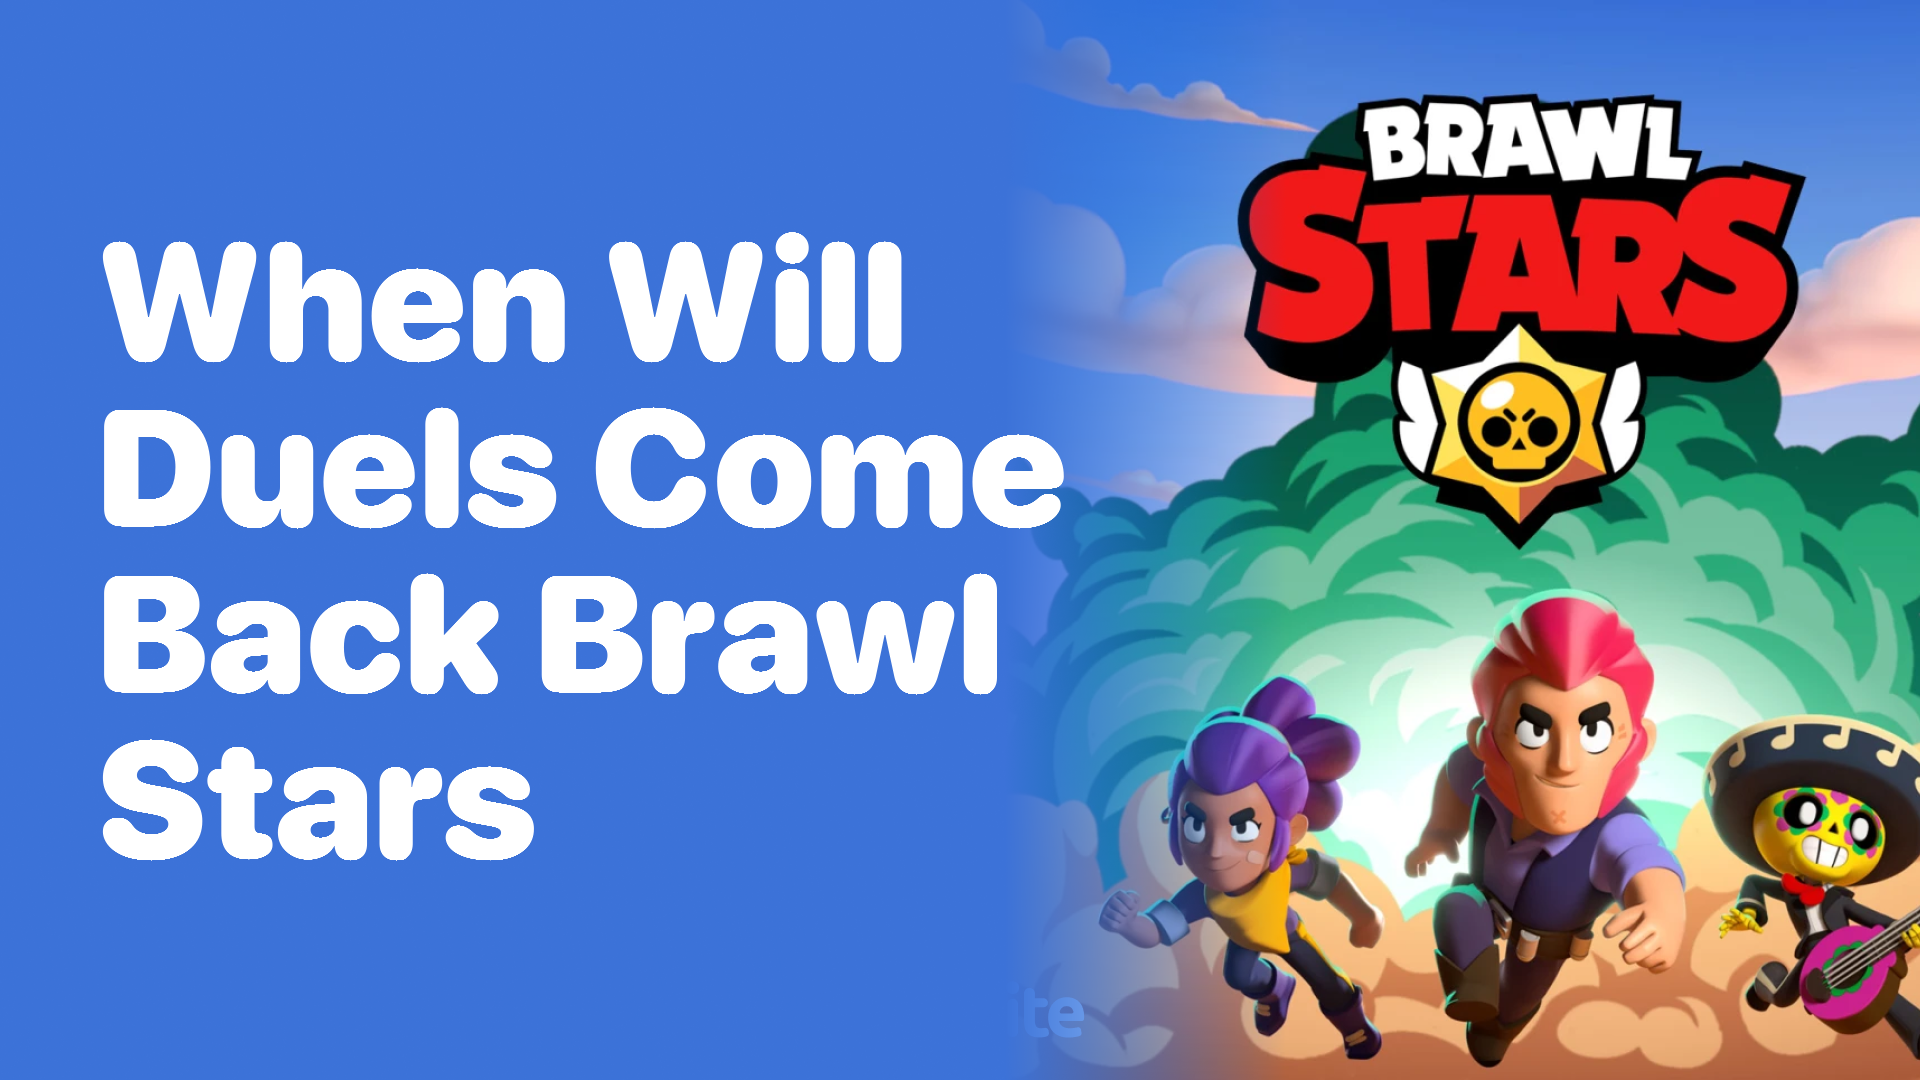 When Will Duels Come Back to Brawl Stars?